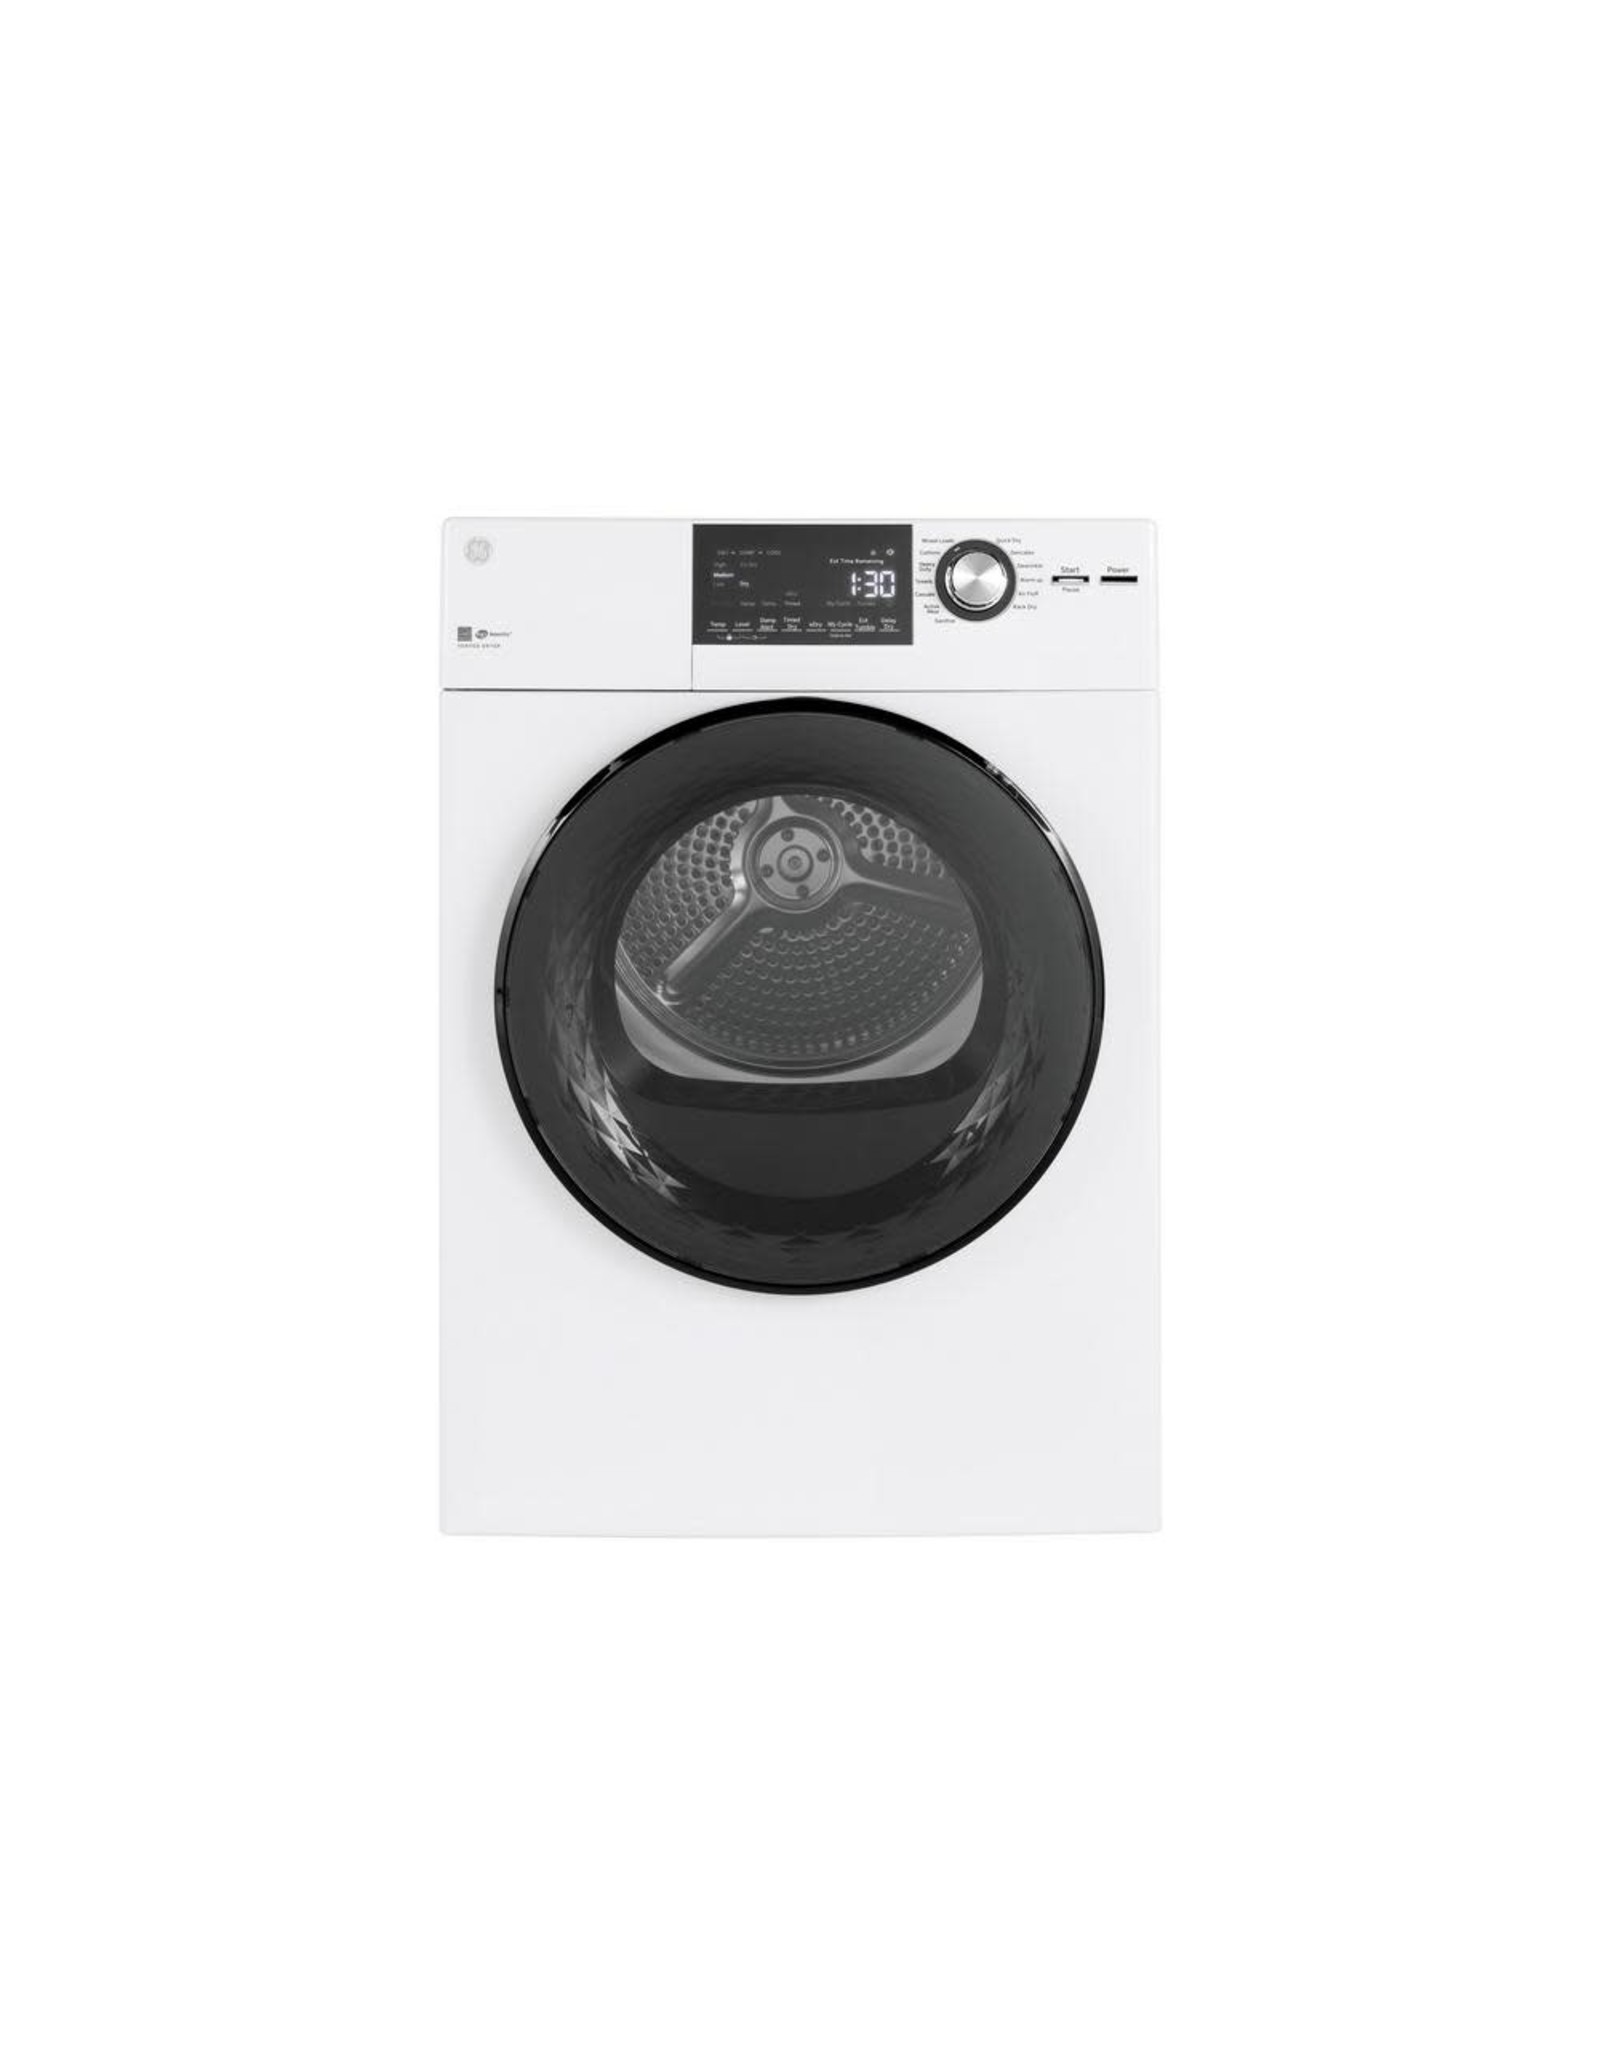 GFD14ESSNWWGE 4.3 cu. ft. 240 Volt White Electric Dryer with Stainless Steel Basket, ENERGY STAR